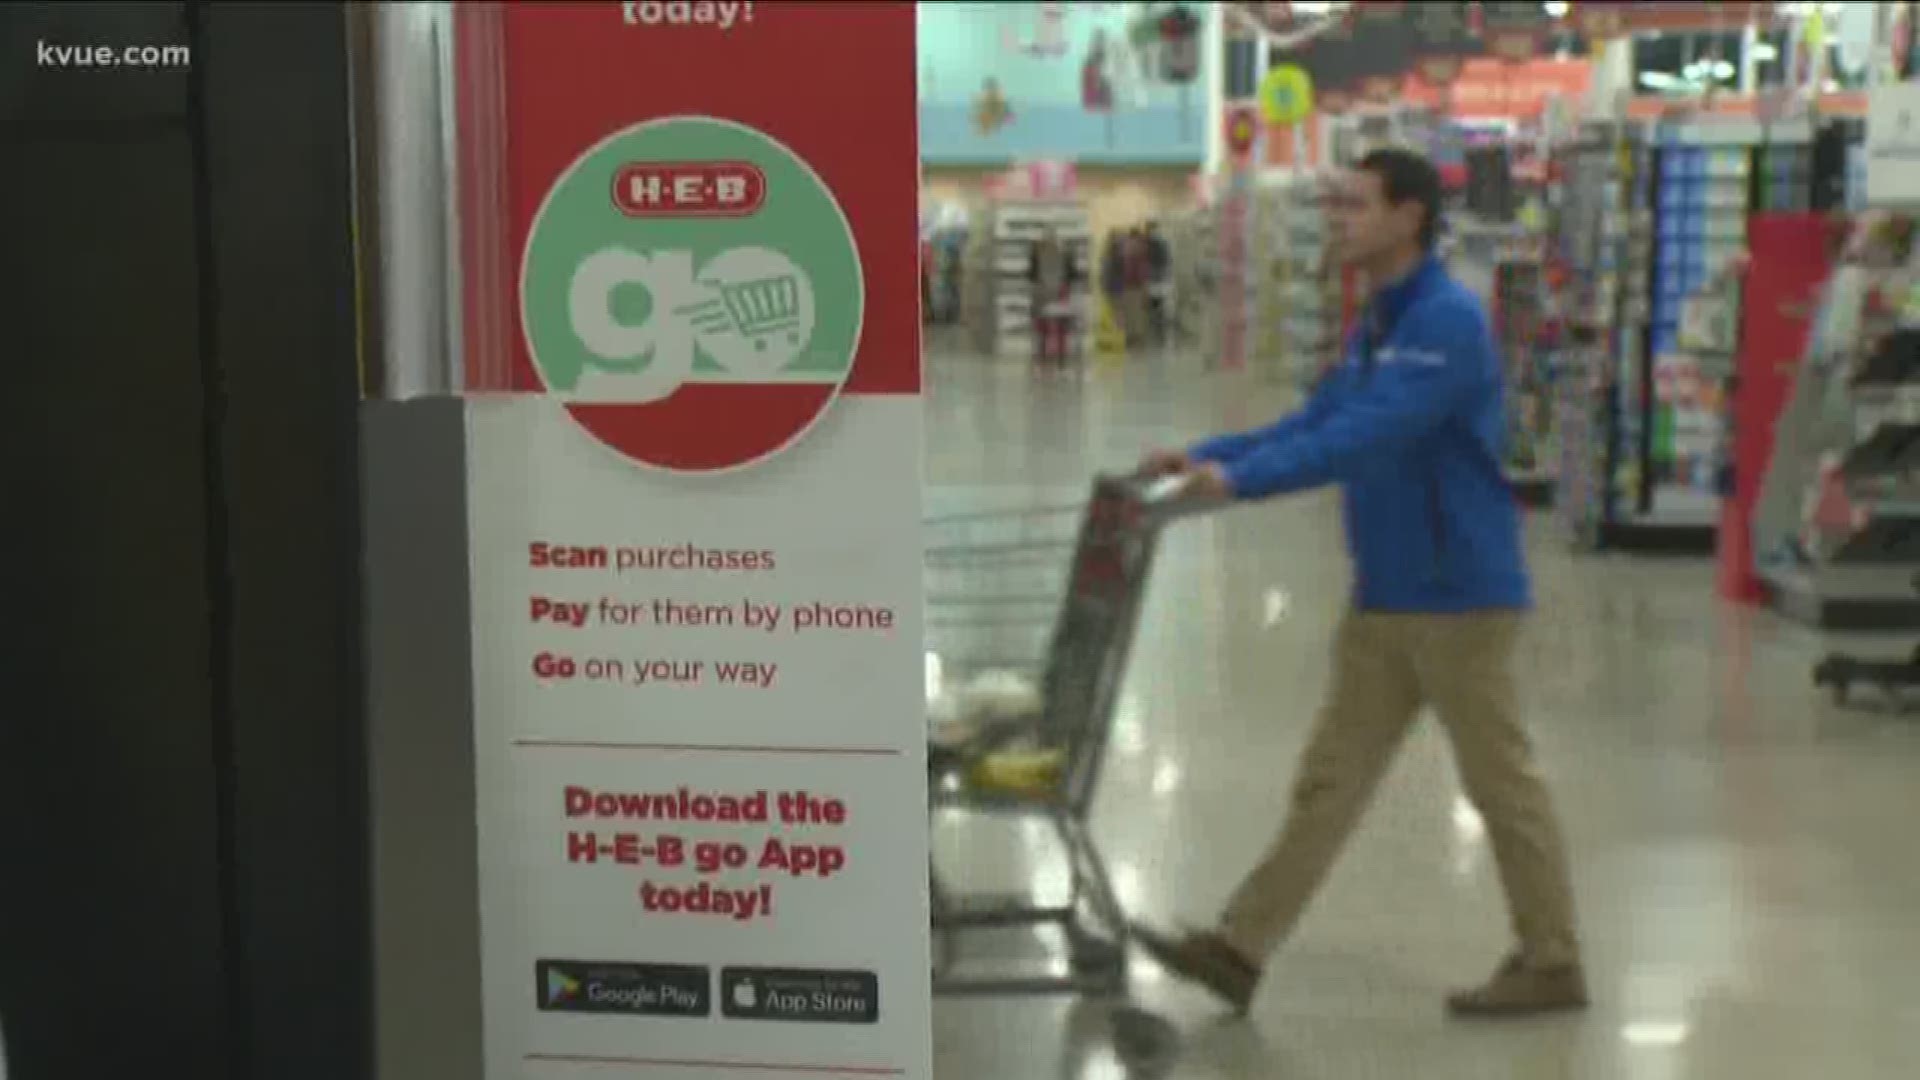 H-E-B has a new app that turns your phone into a scanner you bring around the store. The new app allows you to scan your items while you shop and skip the check out line.